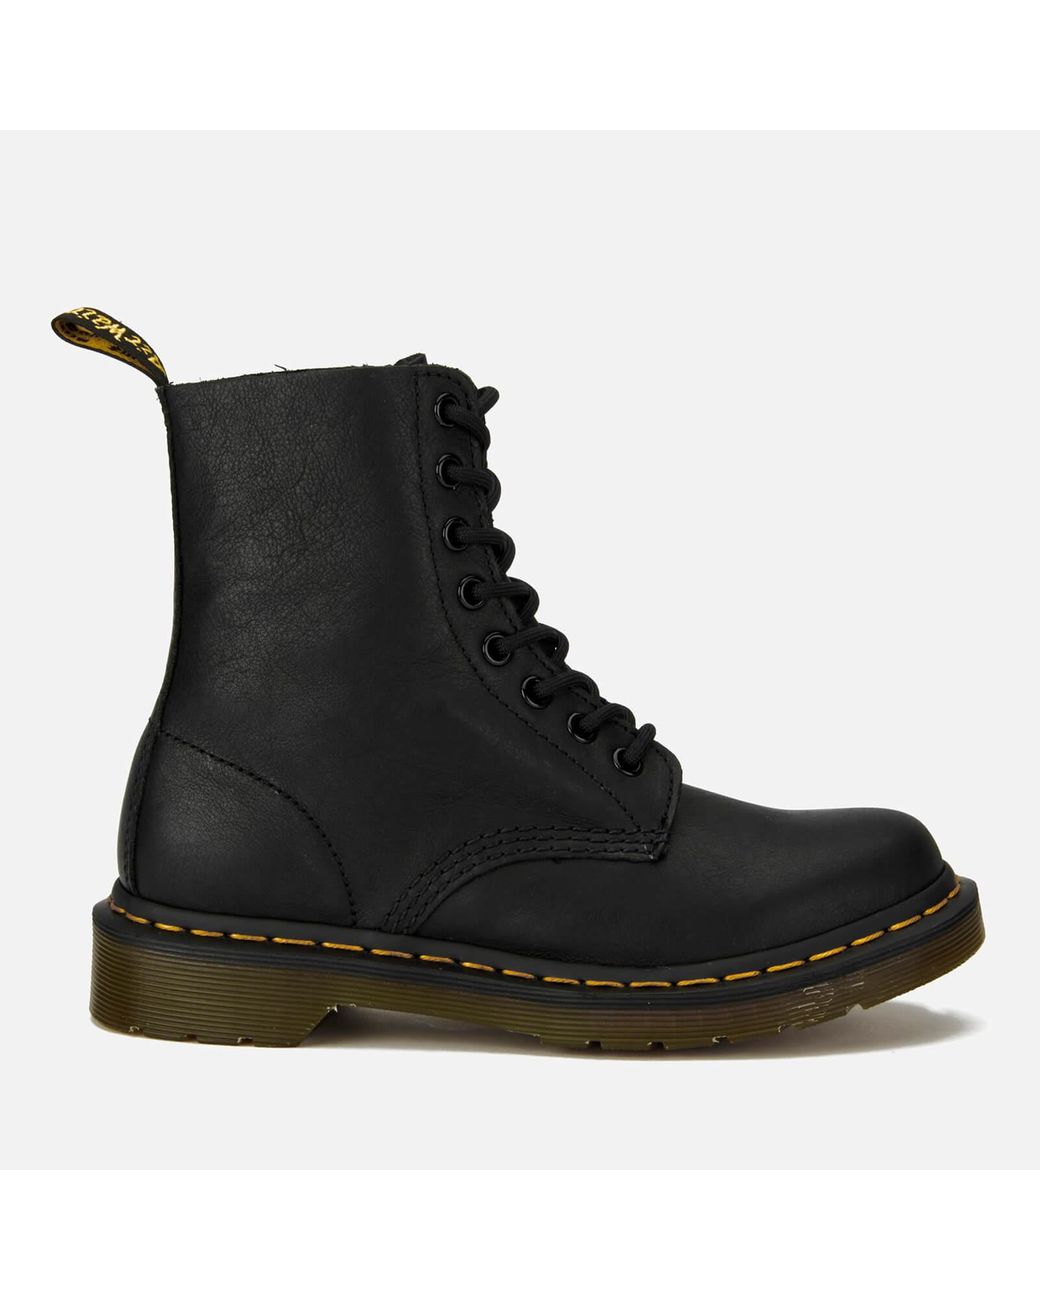 Dr. Martens 1460 Pascal Virginia Leather 8-eye Boots in Black | Lyst